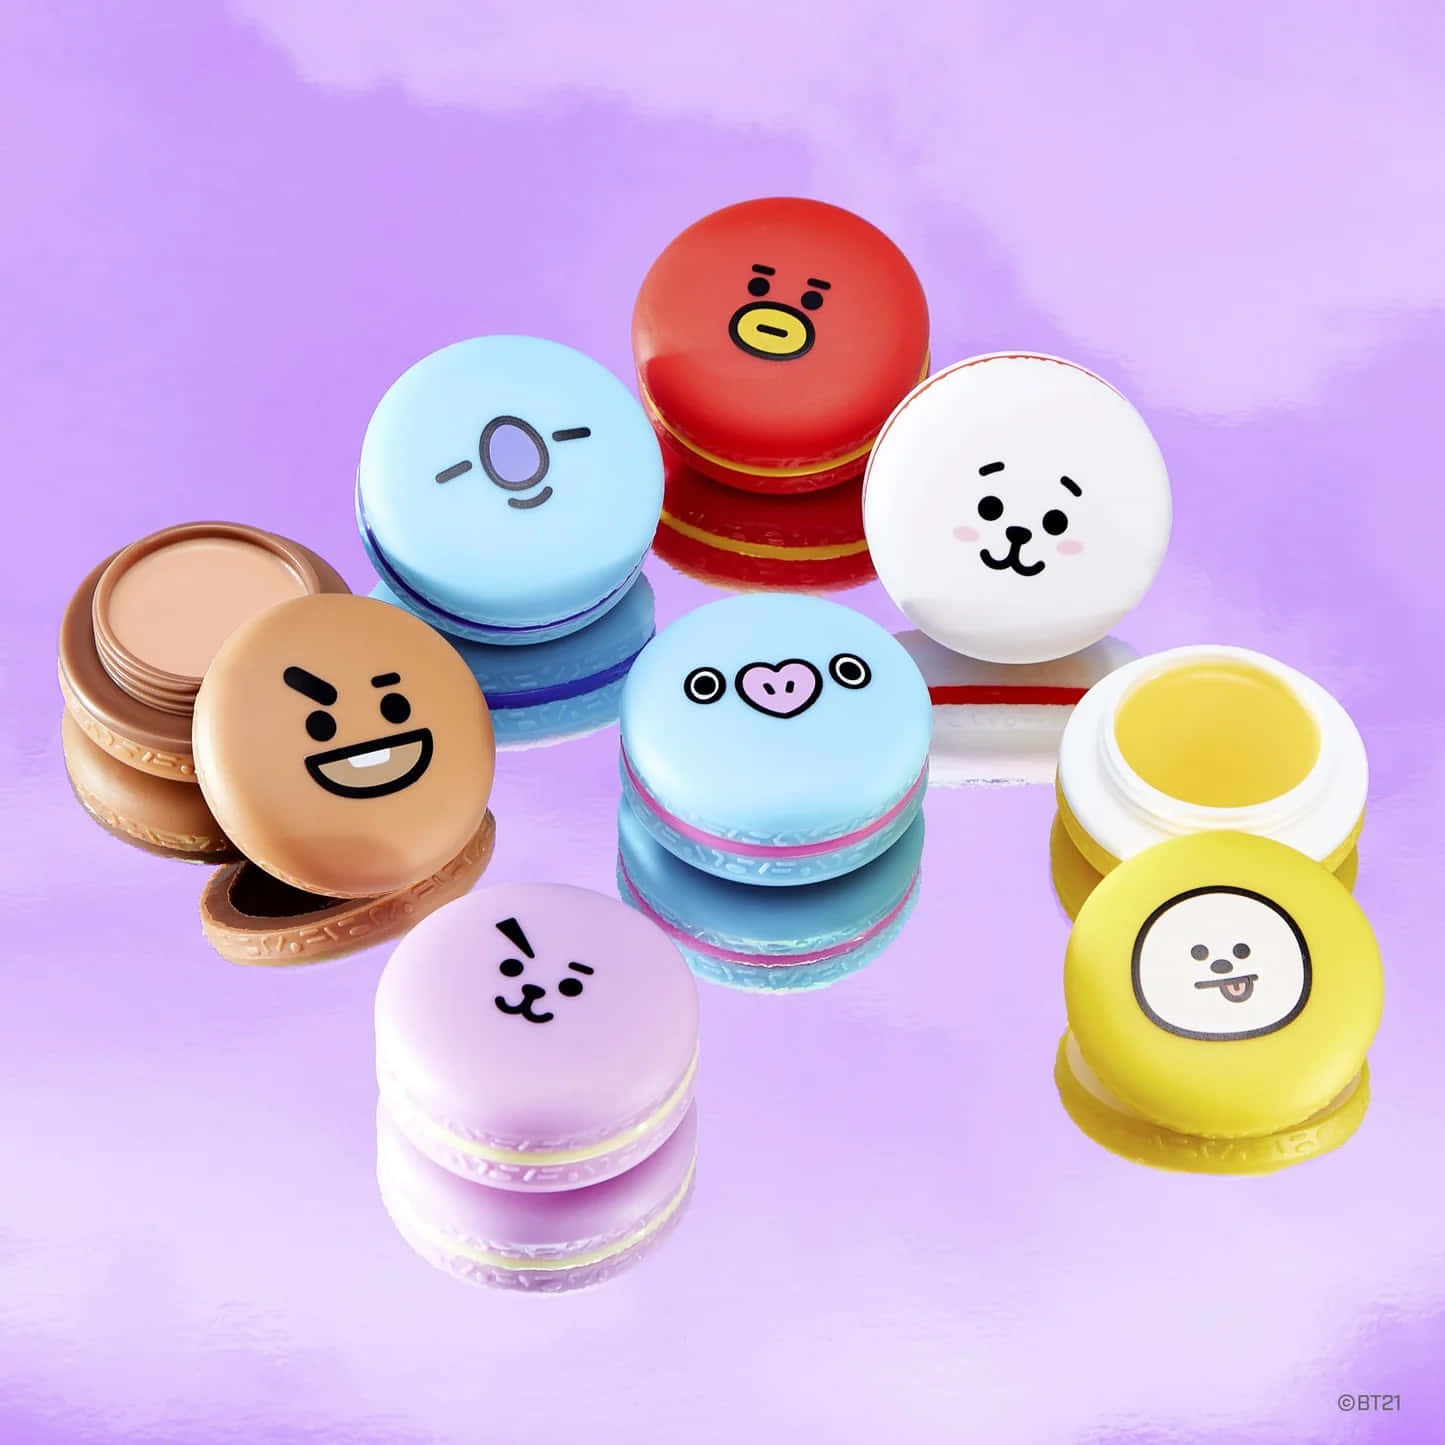 BT21 Characters Gathering in a Vibrant Background